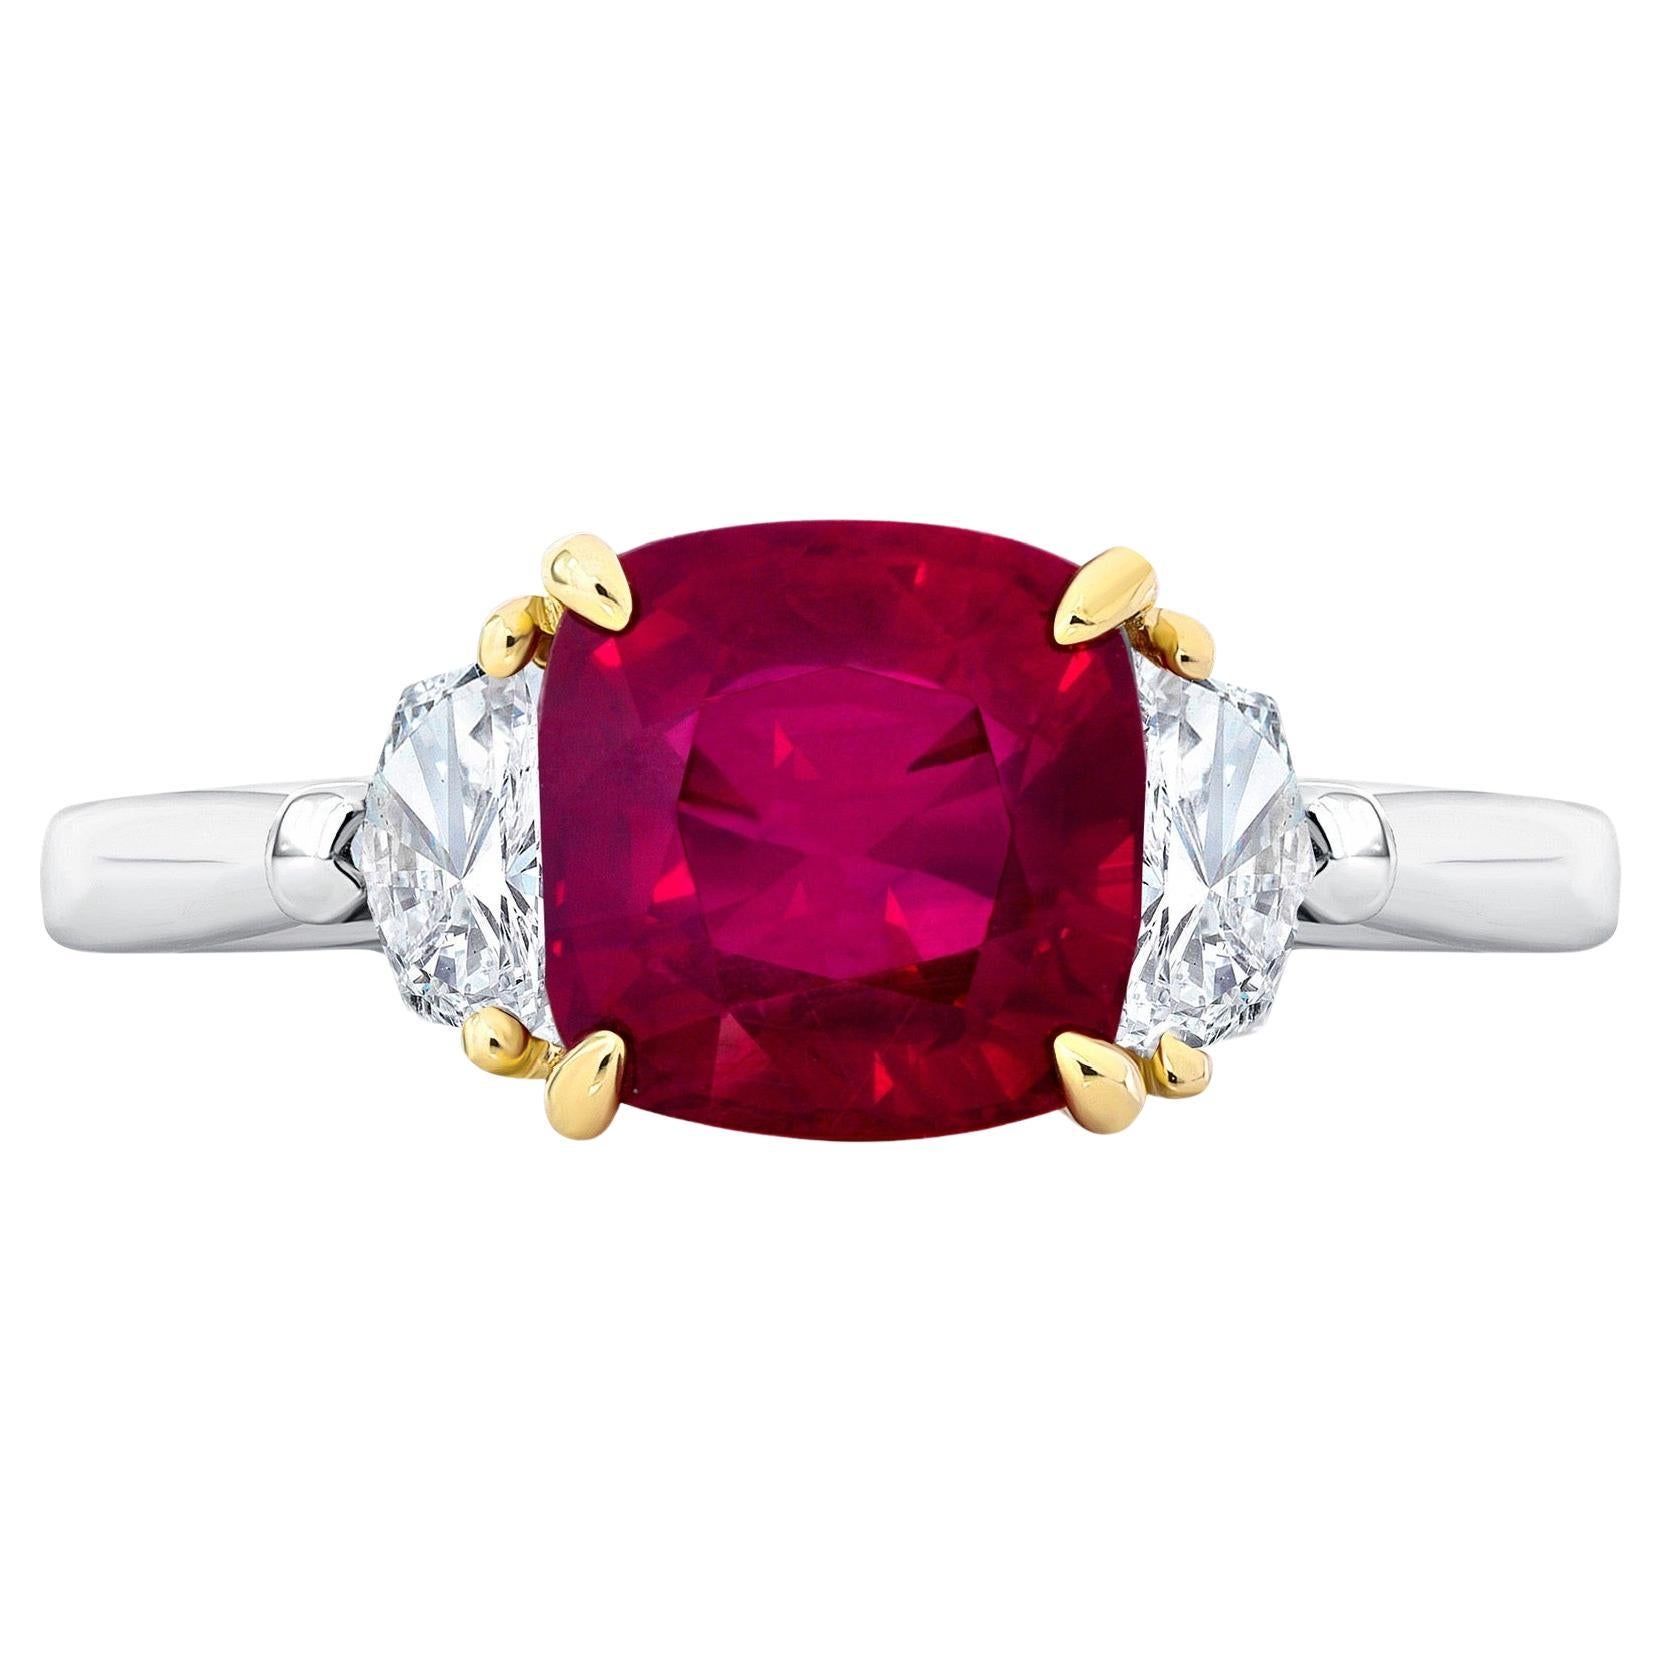 3.14ct untreated Mozambique Ruby ring. GIA certified.